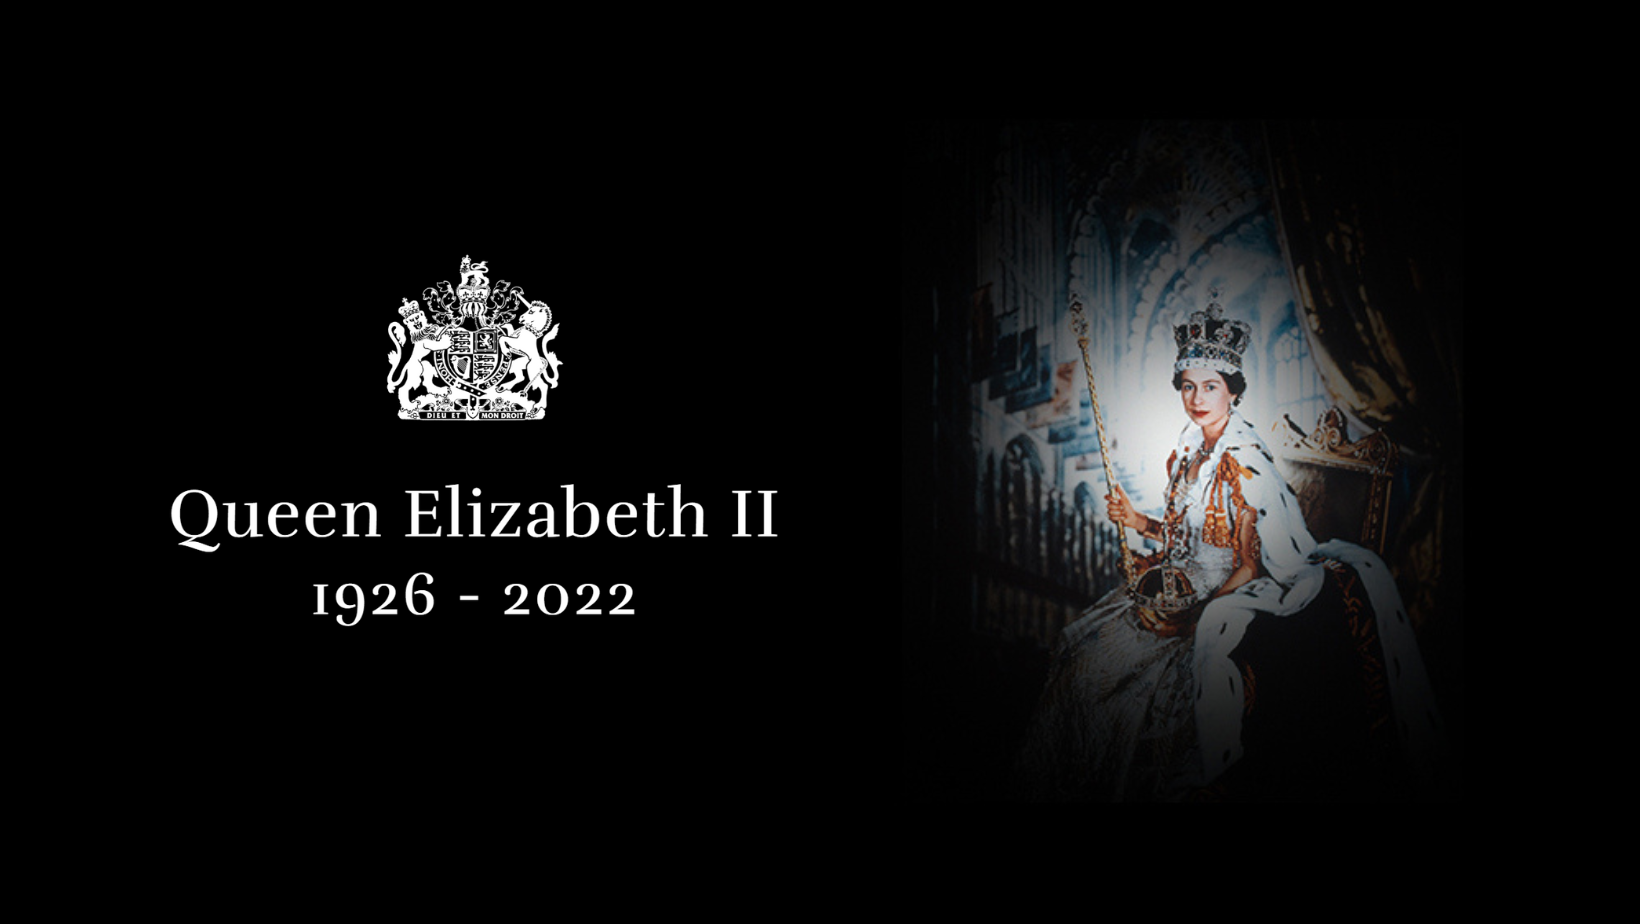 An announcement of the life and death of Queen Elizabeth II for use online